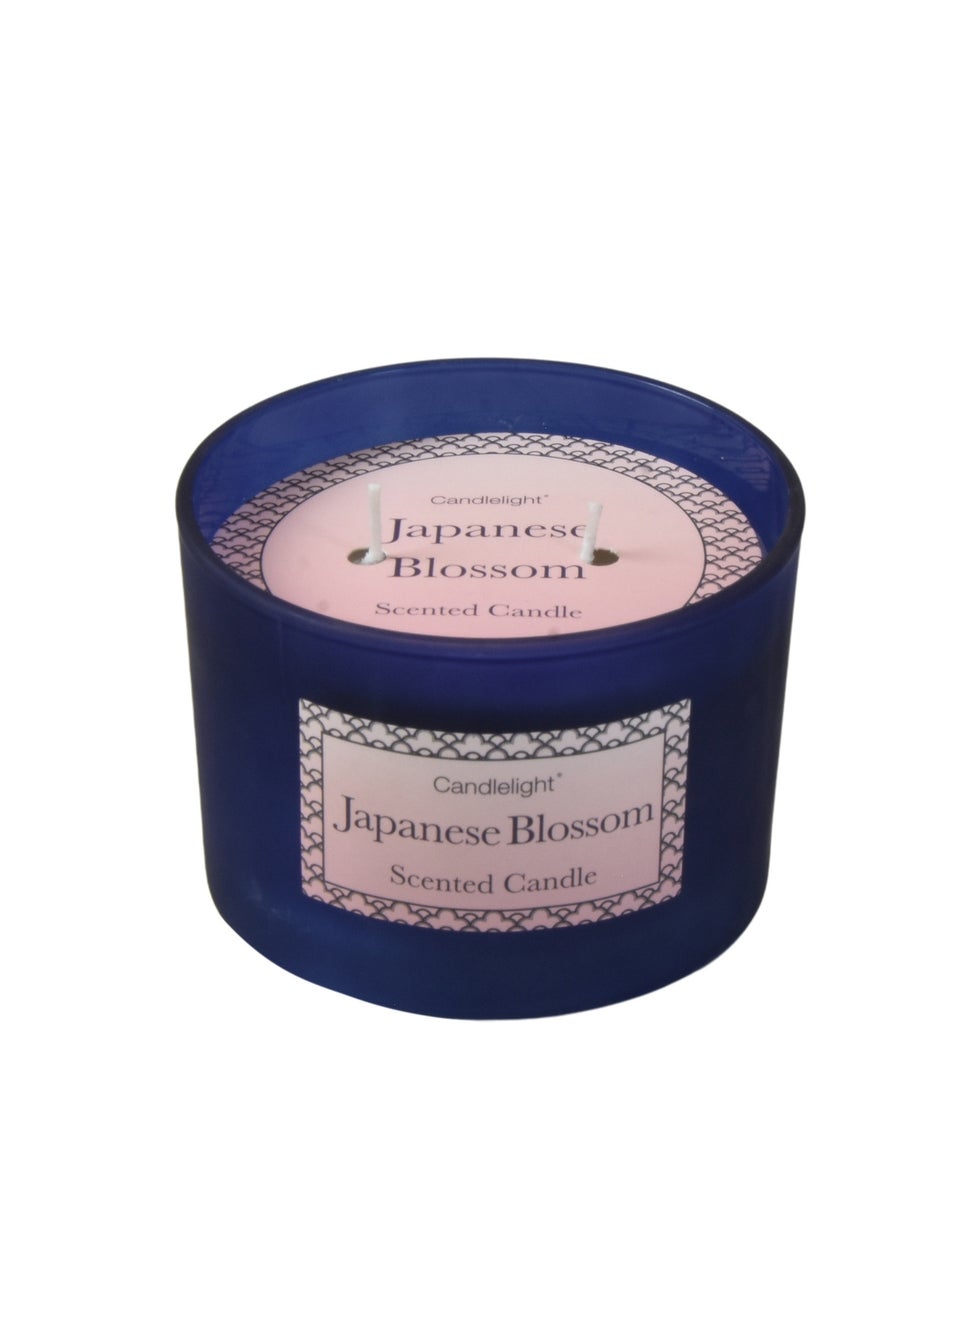 Candlelight Japanese Blossom Scented Candle